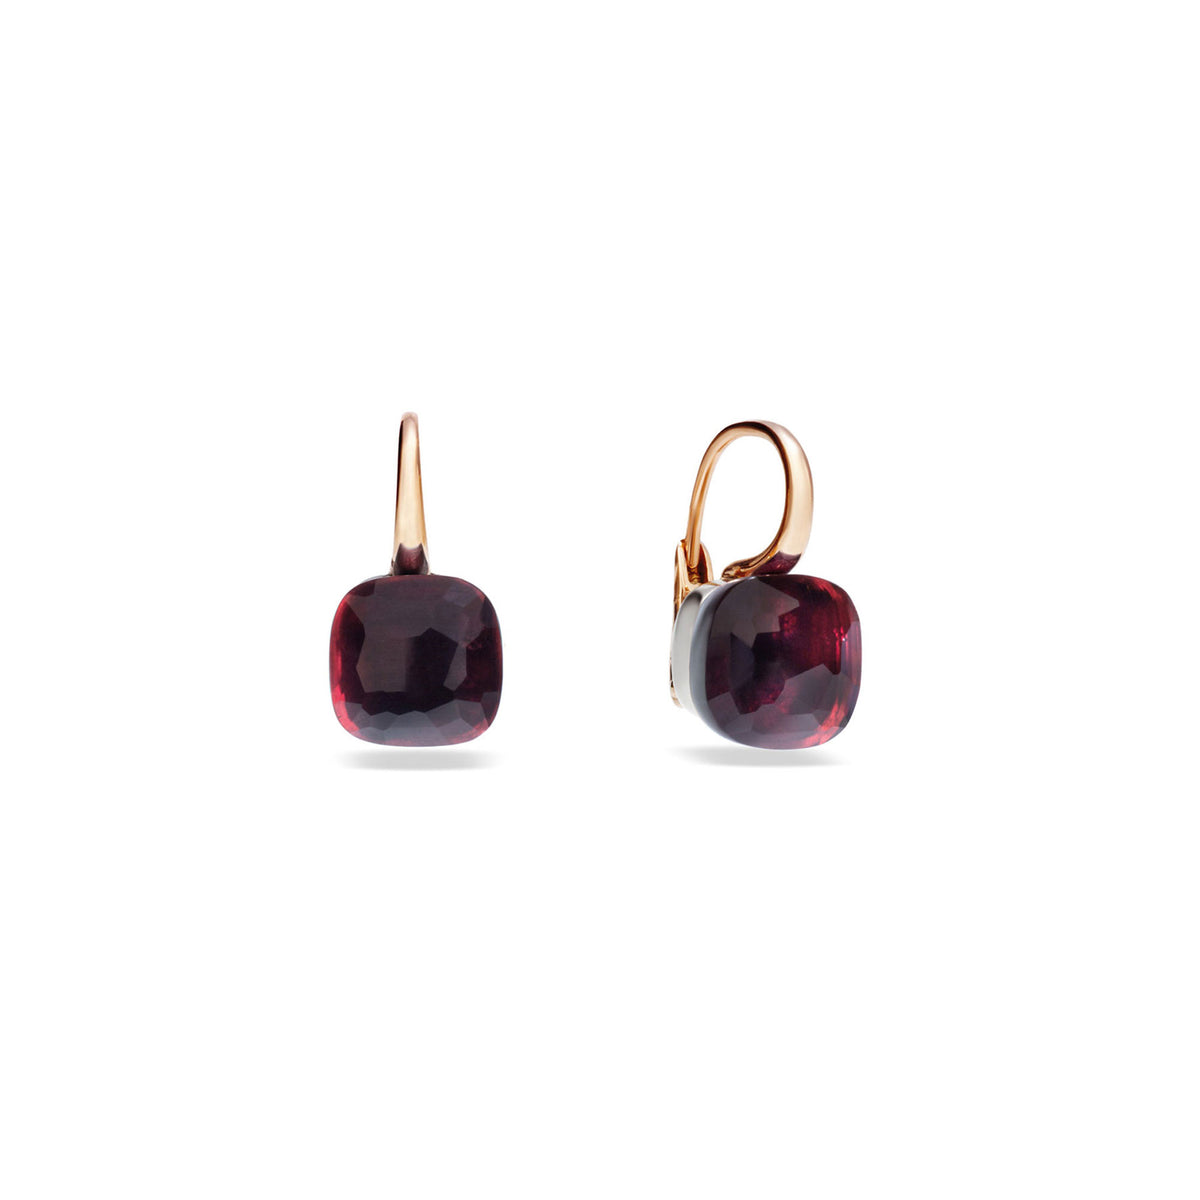 Nudo Classic Earrings in 18k Rose and White Gold with Garnet - Orsini Jewellers NZ